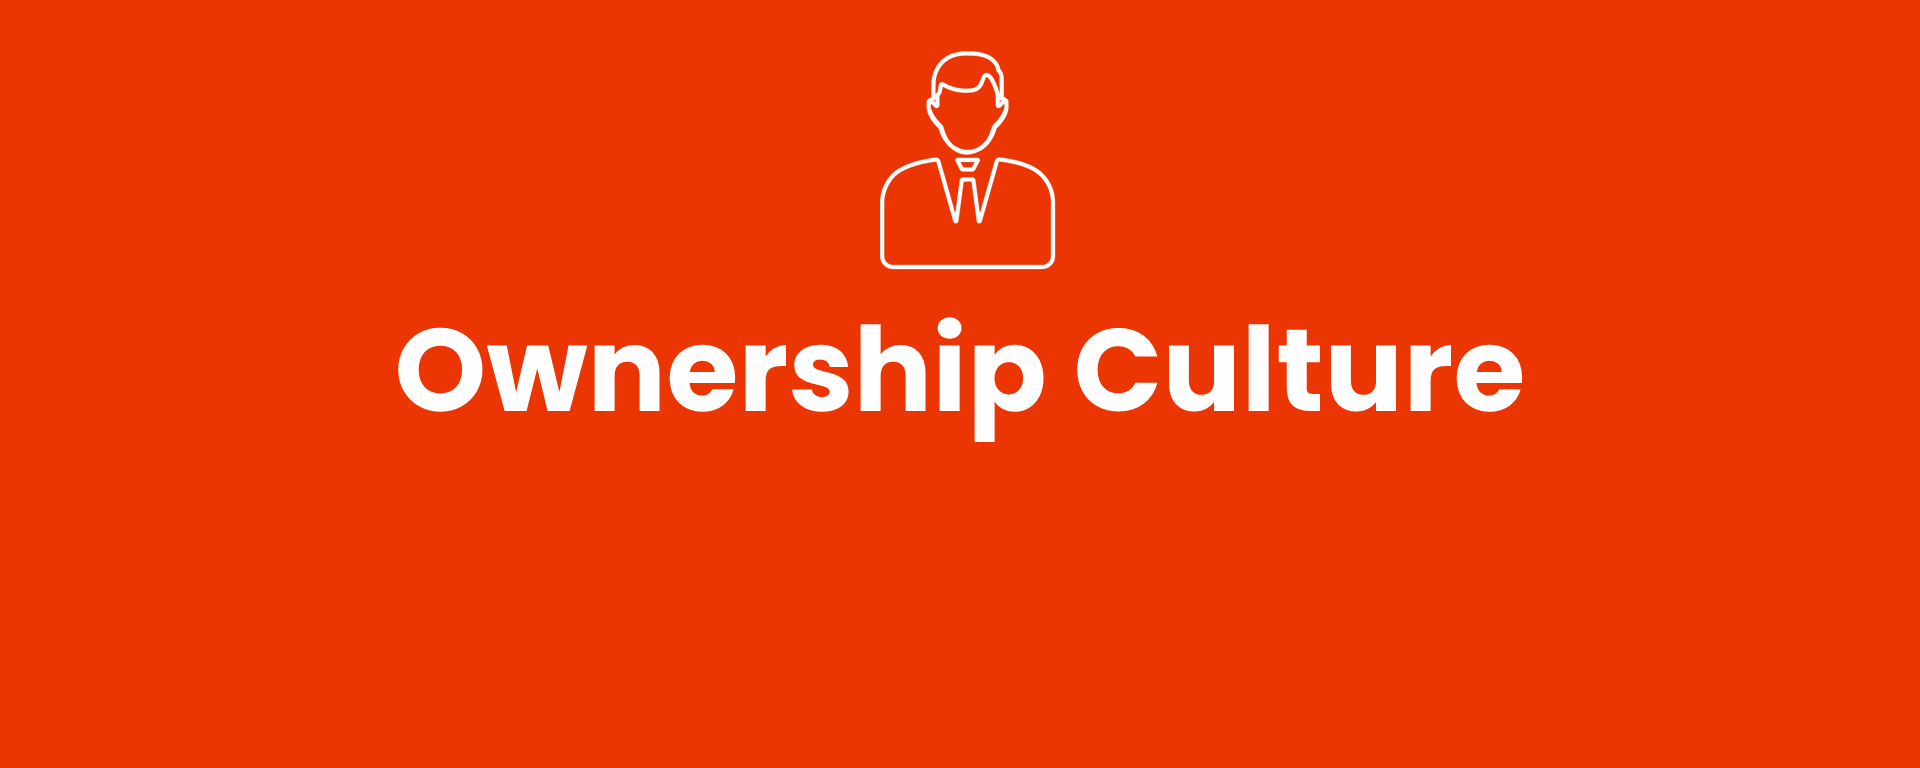 Ownership Culture